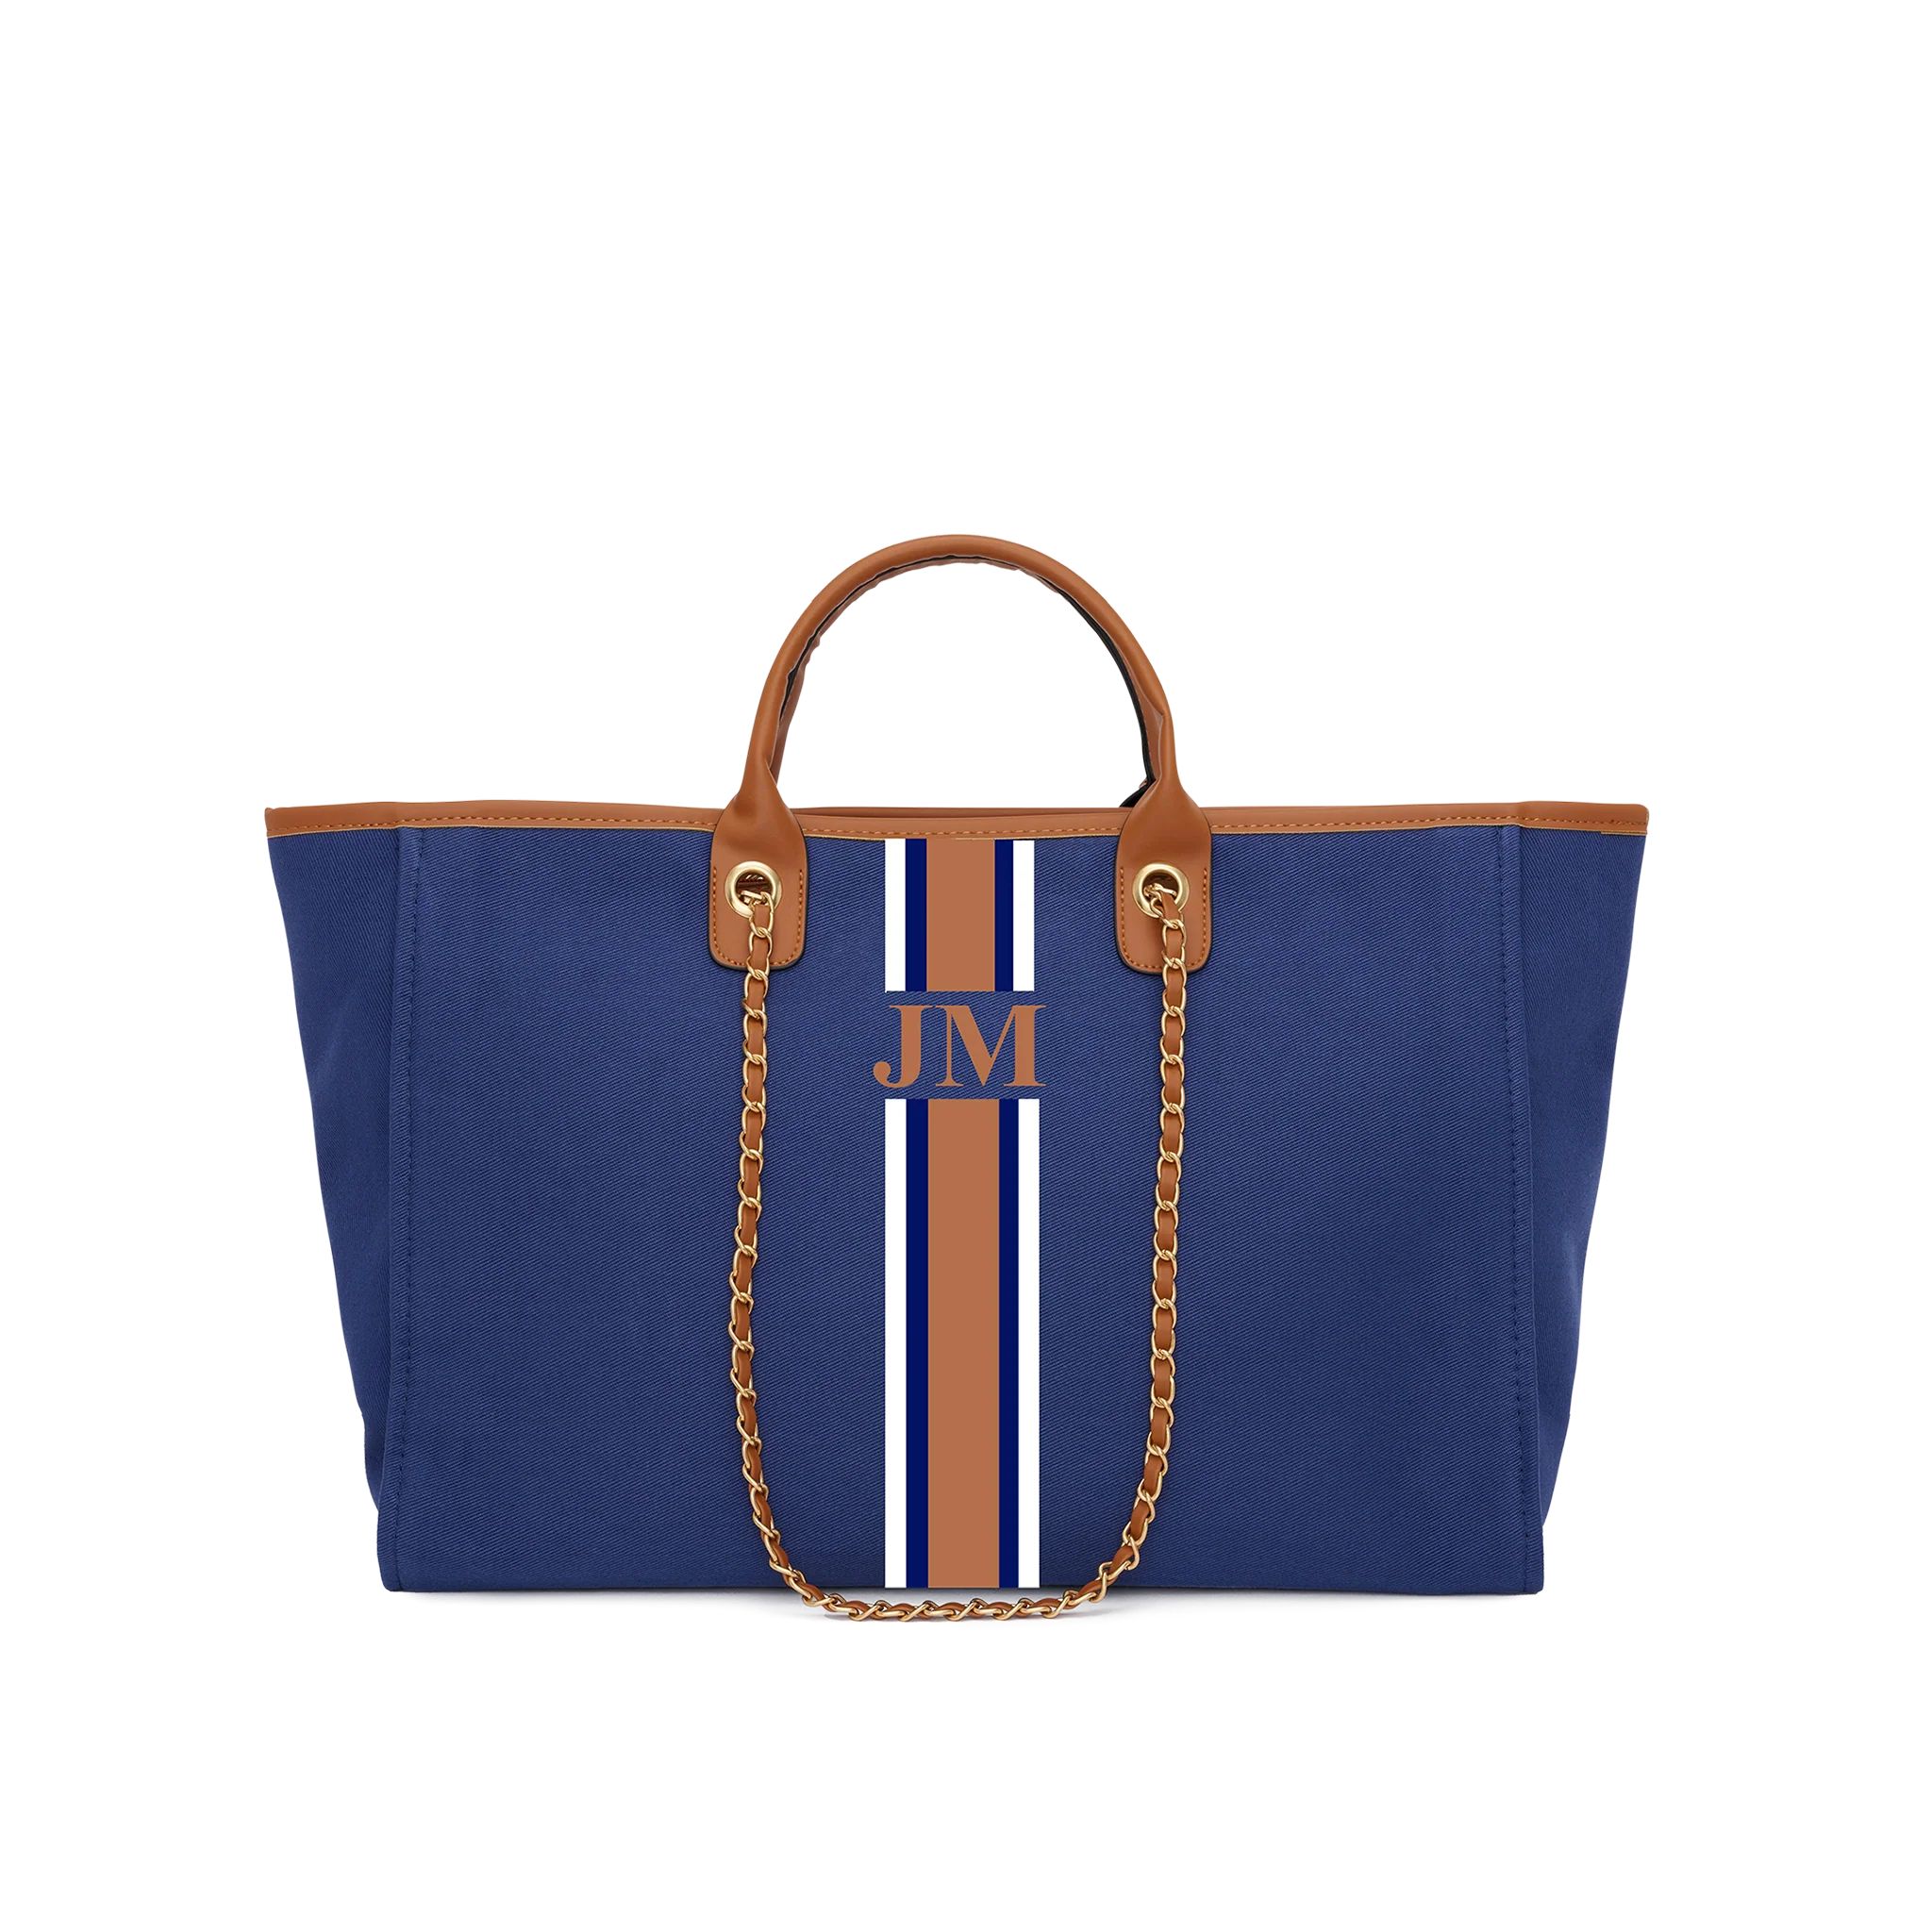 The Lily Canvas Tote Bag Midnight Navy with White & Dark Brown Stripes | Lily and Bean